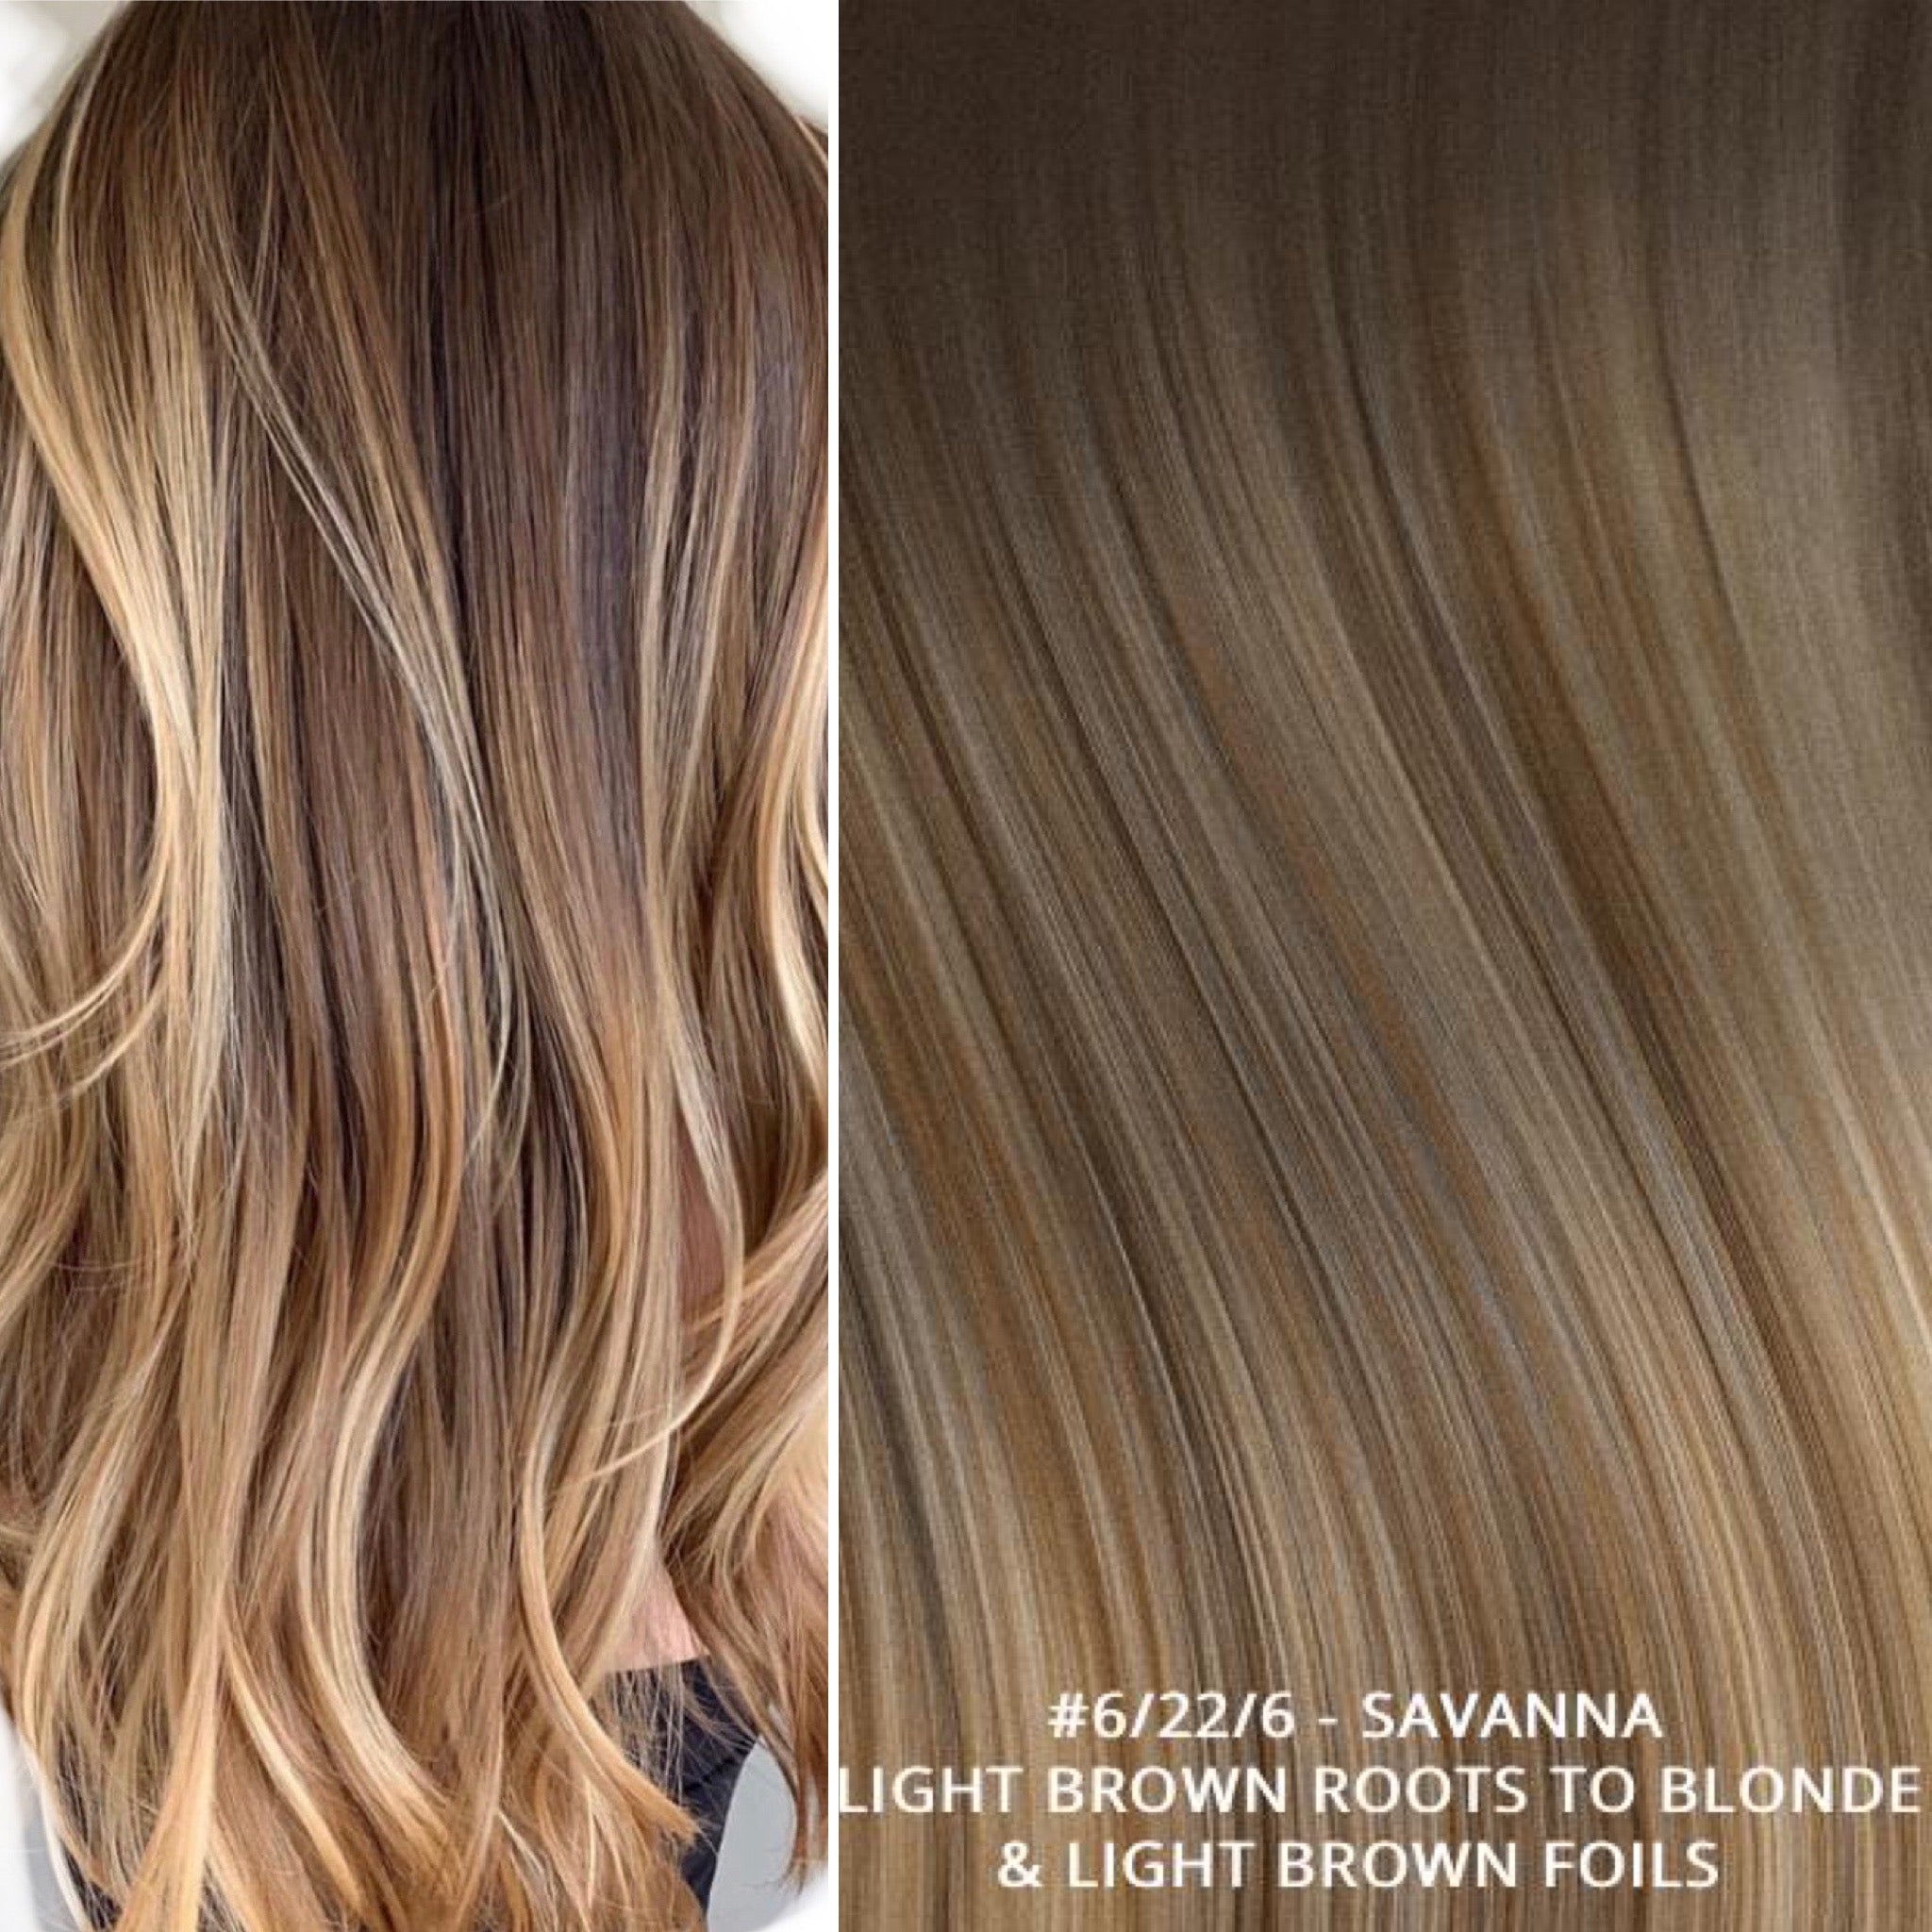 RUSSIAN TAPE BALAYAGE OMBRE HAIR EXTENSIONS #6/22/6 - SAVANNA - LIGHT BROWN ROOTS TO BLONDE & LIGHT BROWN FOILS